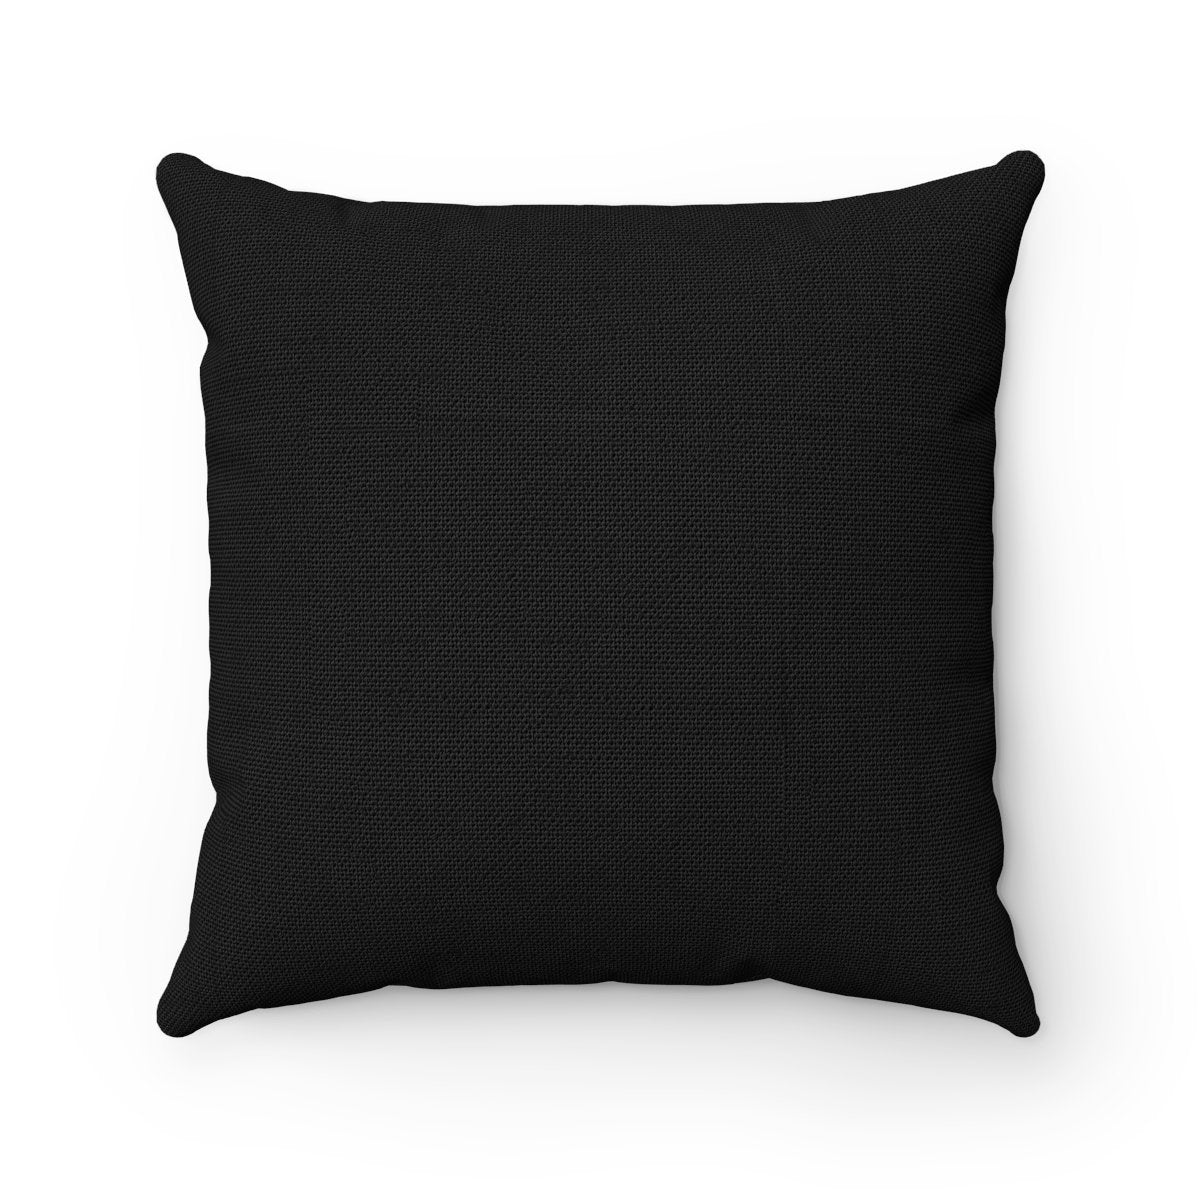 Cat Throw Pillow With a Solid Black Back